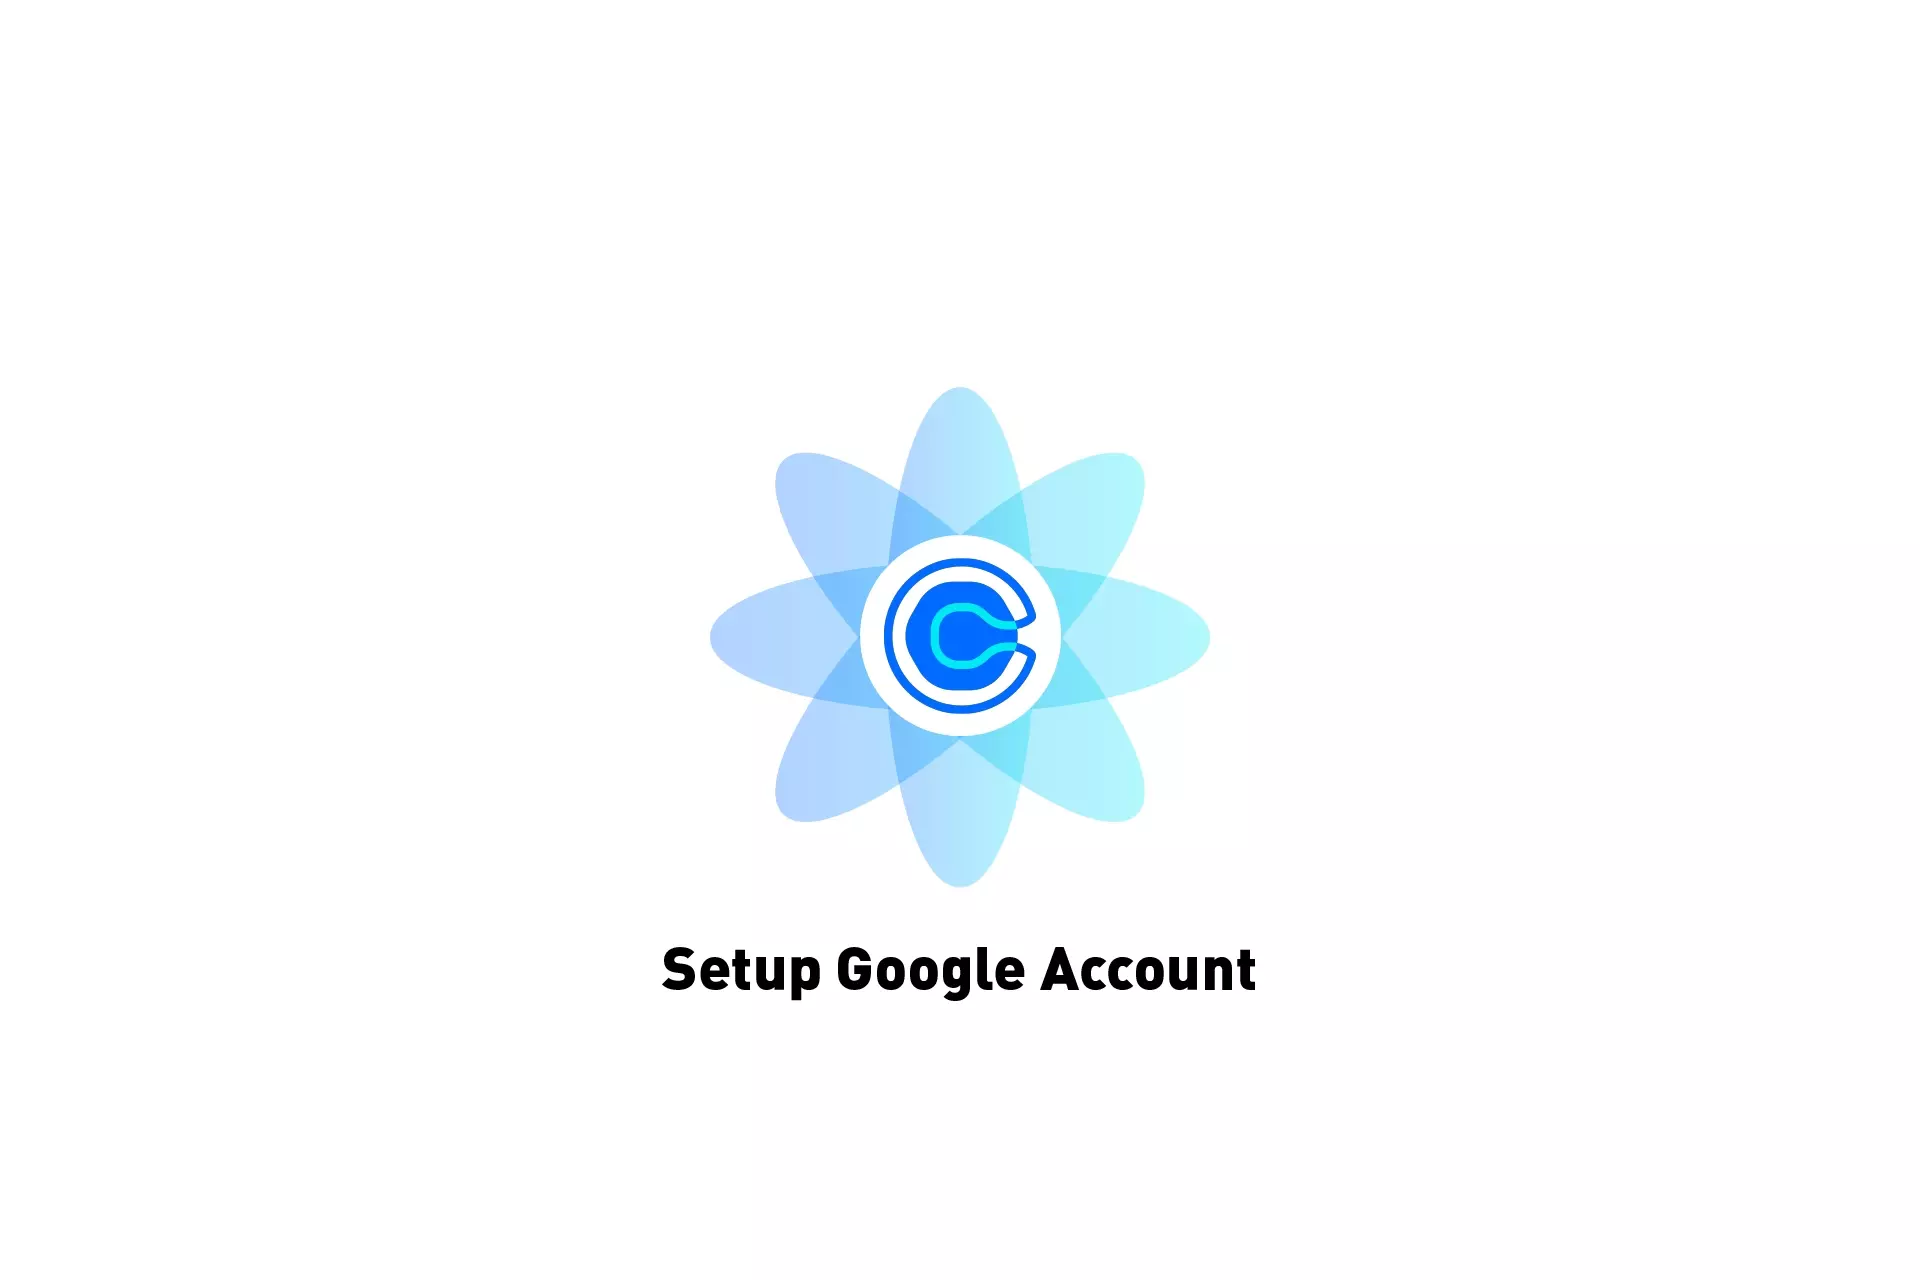 A flower that represents Calendly with the text "Setup Google Account" beneath it.